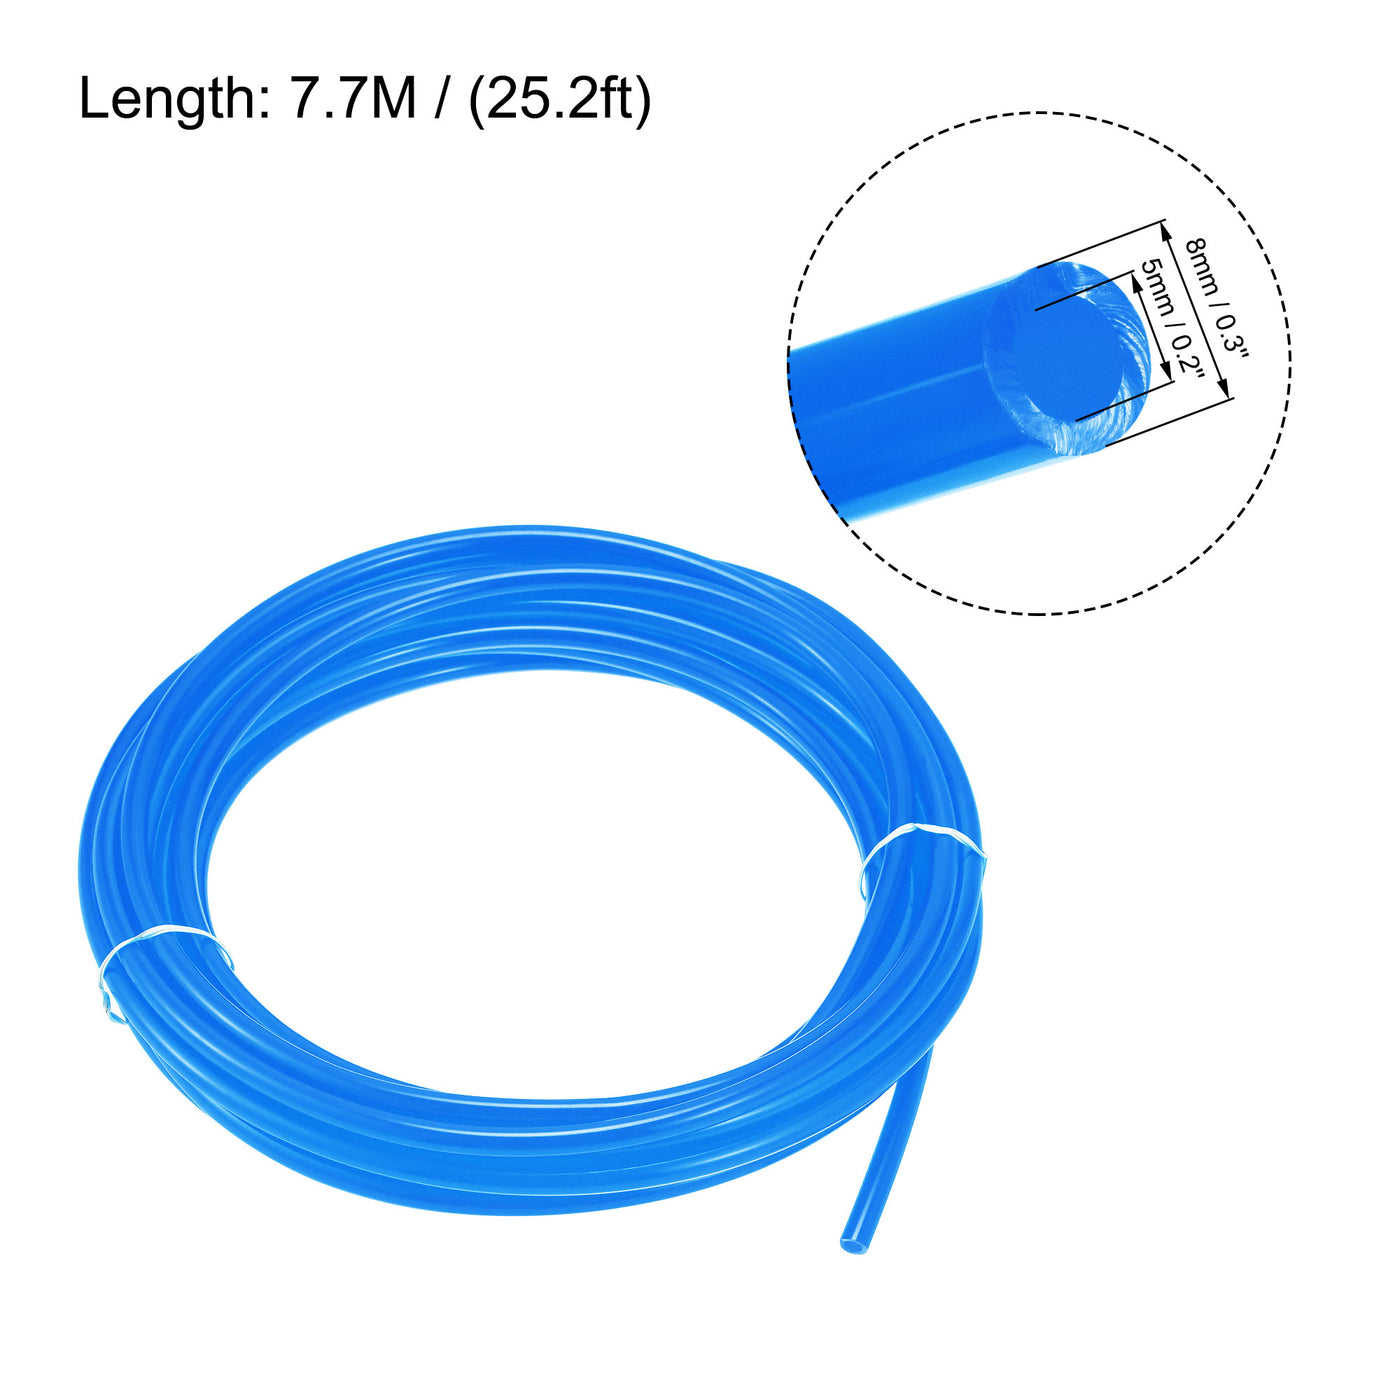 uxcell Uxcell Pneumatic Air Hose Tubing Air Compressor Tube 5mm/0.2''ID x 8mm/0.3''OD x 7.7m/25.2Ft Polyurethane Pipe Blue